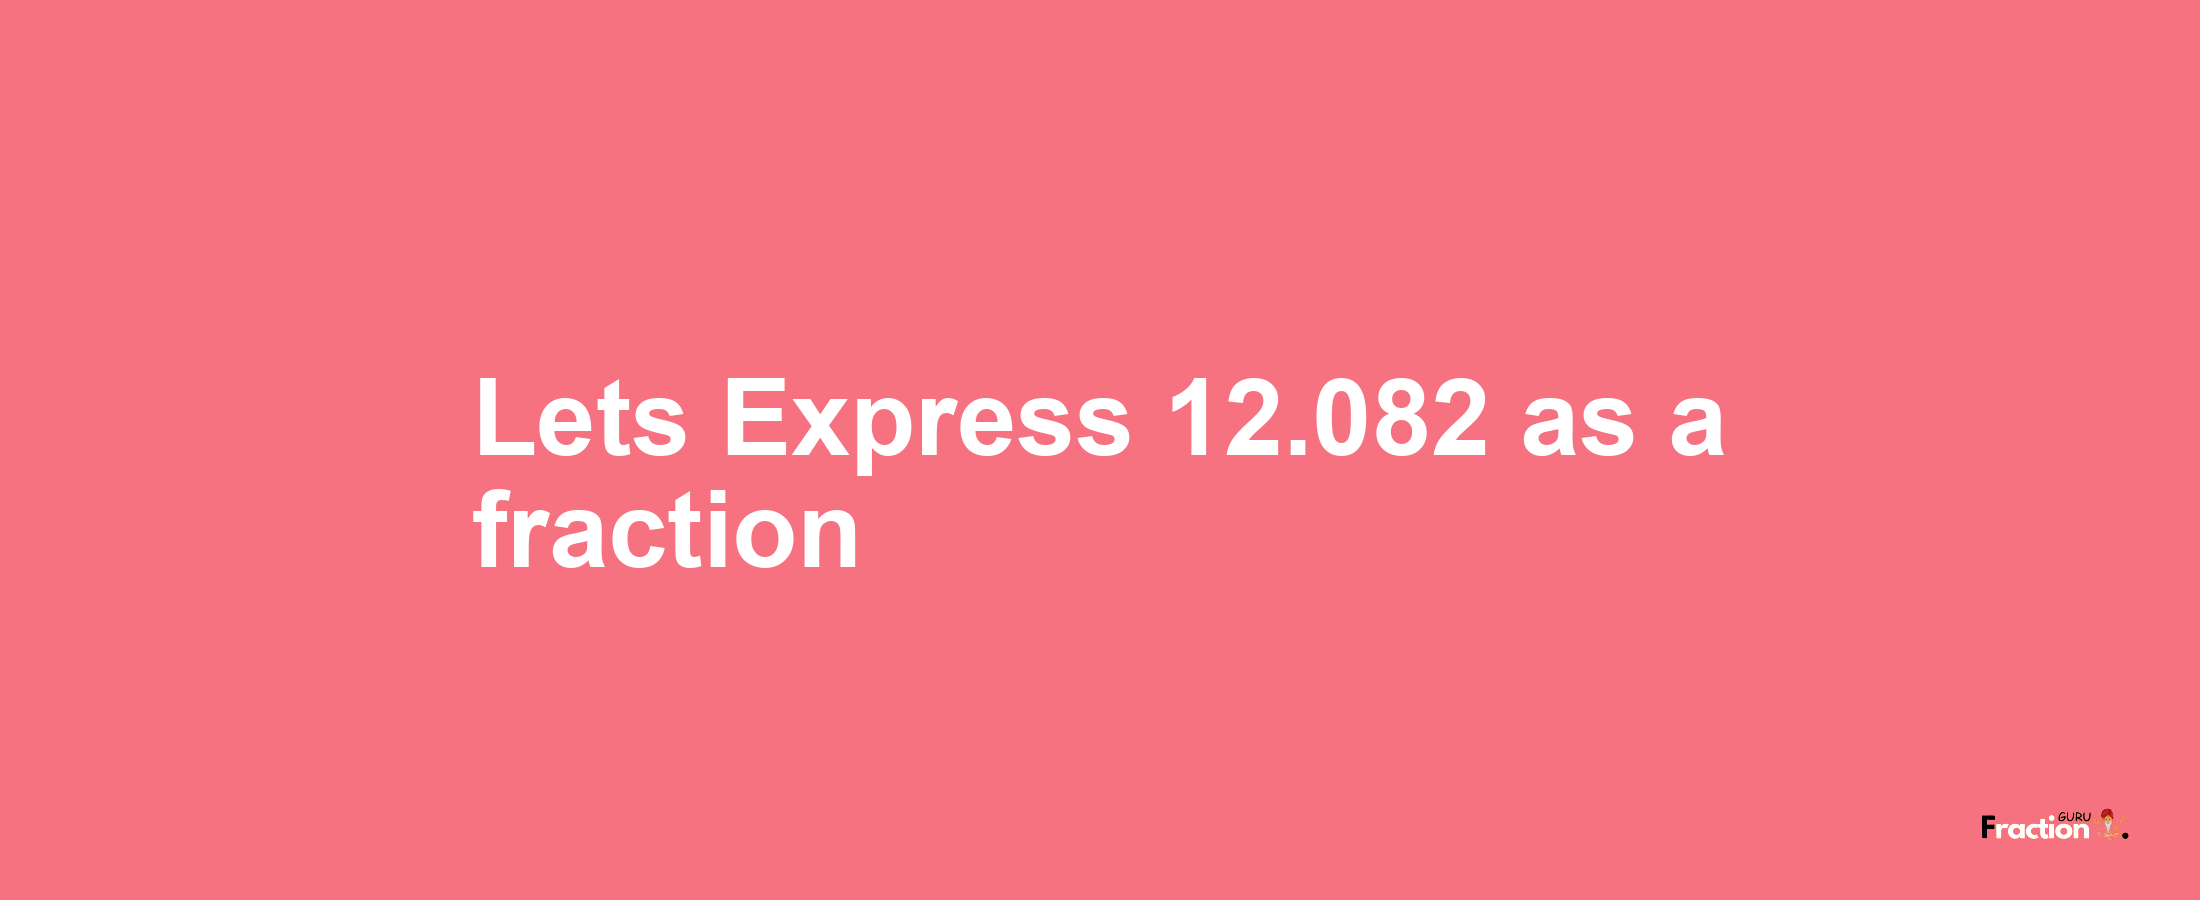 Lets Express 12.082 as afraction